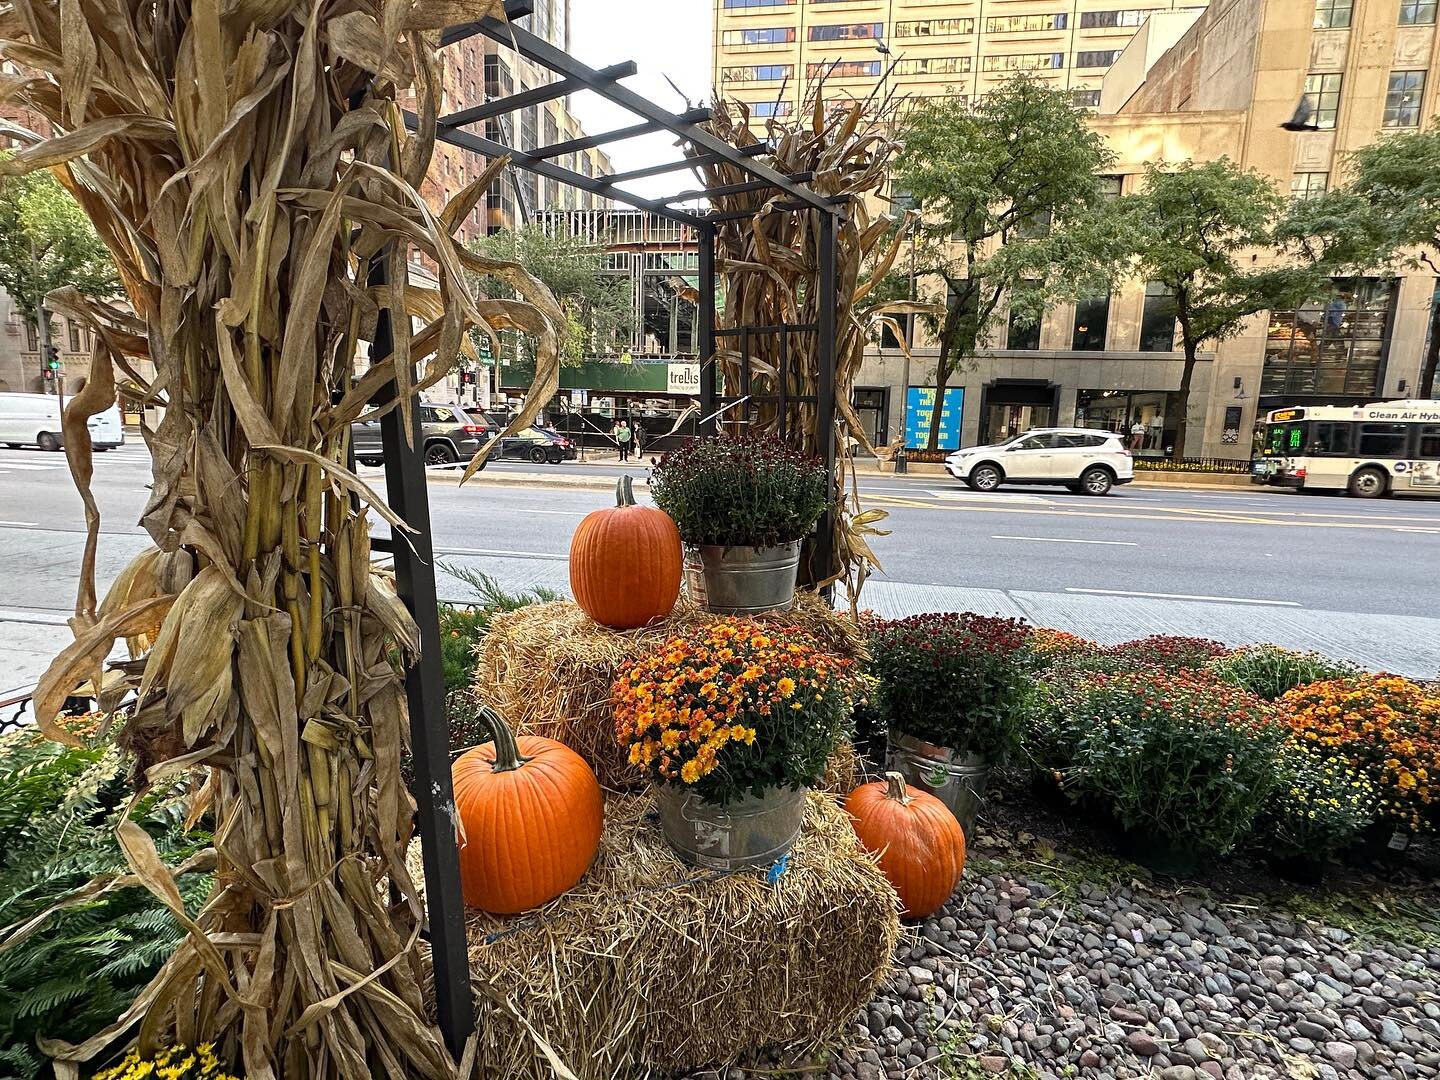 Pumpkins. We love our morning on @themagmile. 

#pumpkins #magmile #fall #chicagofall #falllandscape #urbannature #urban #city #parkway #chicagolandscaper